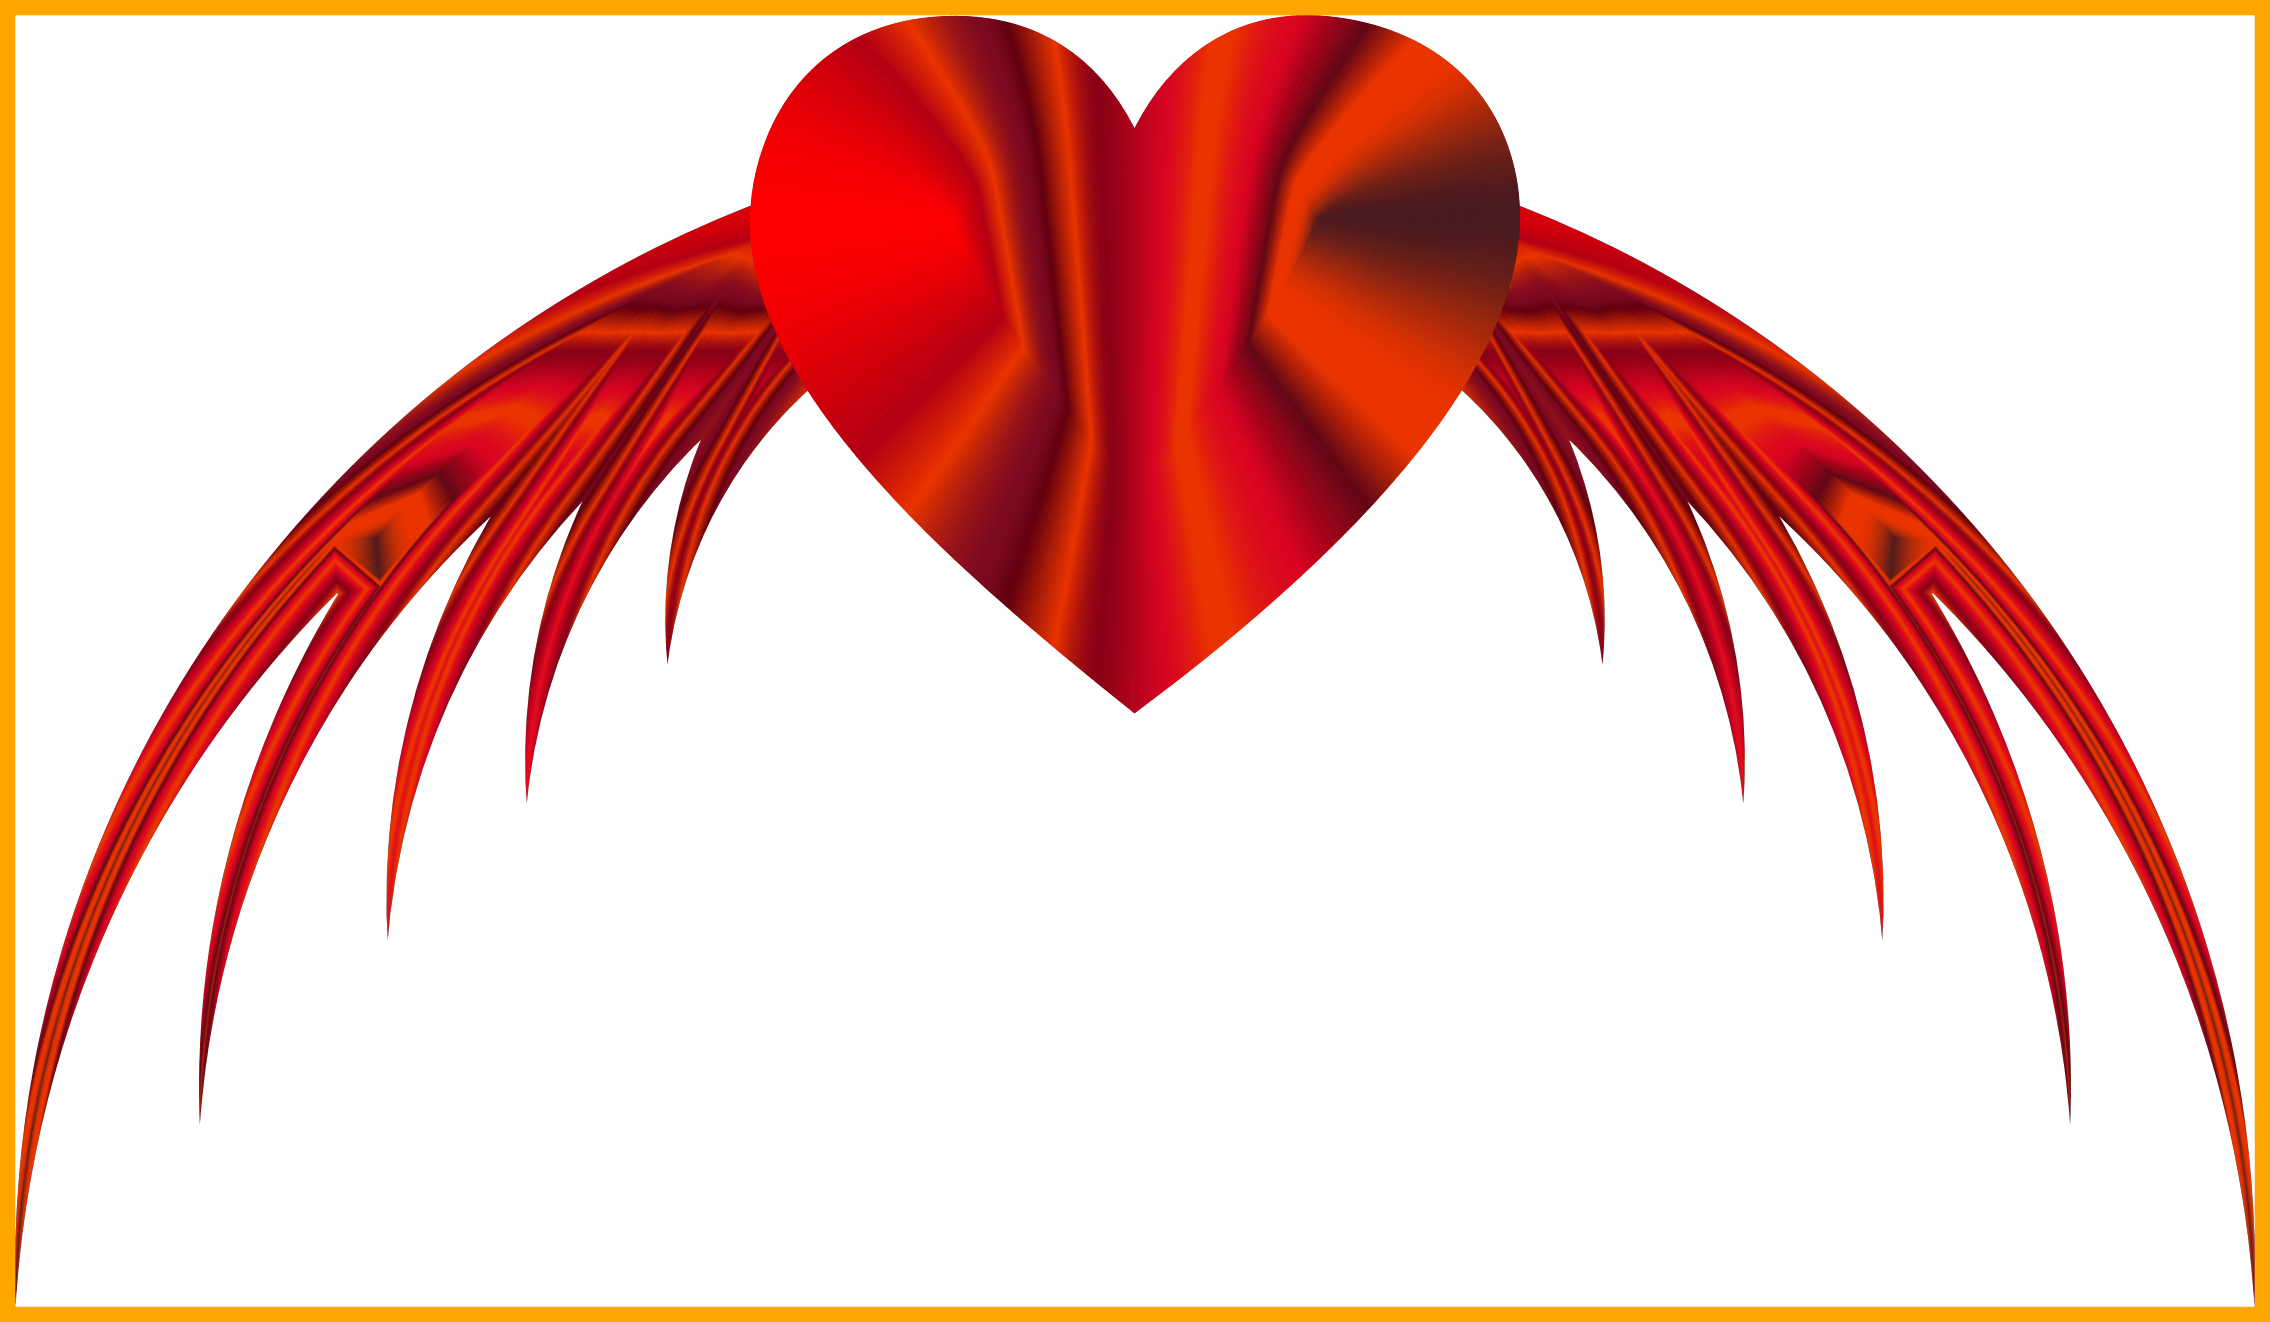 Fish Png Fish Png Art Marvelous Flying Heart Png Clip - Portable Network Graphics (2270x1322)